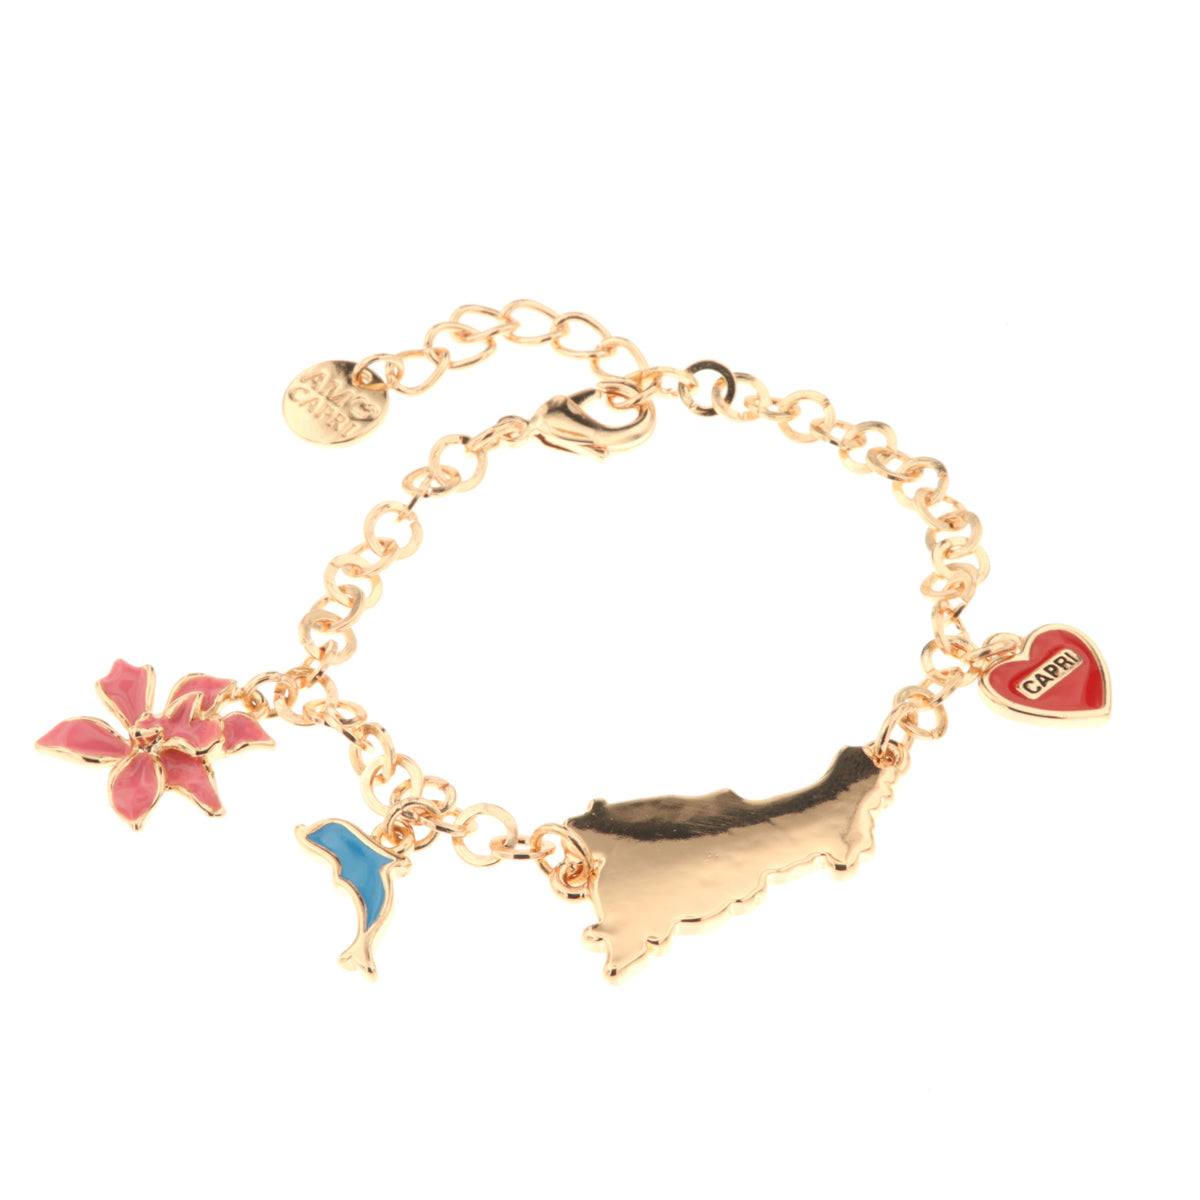 Metal bracelet with Campania -shaped detail and heart -shaped pendants with capri writing, dolphin and flower embellished with colored glazes